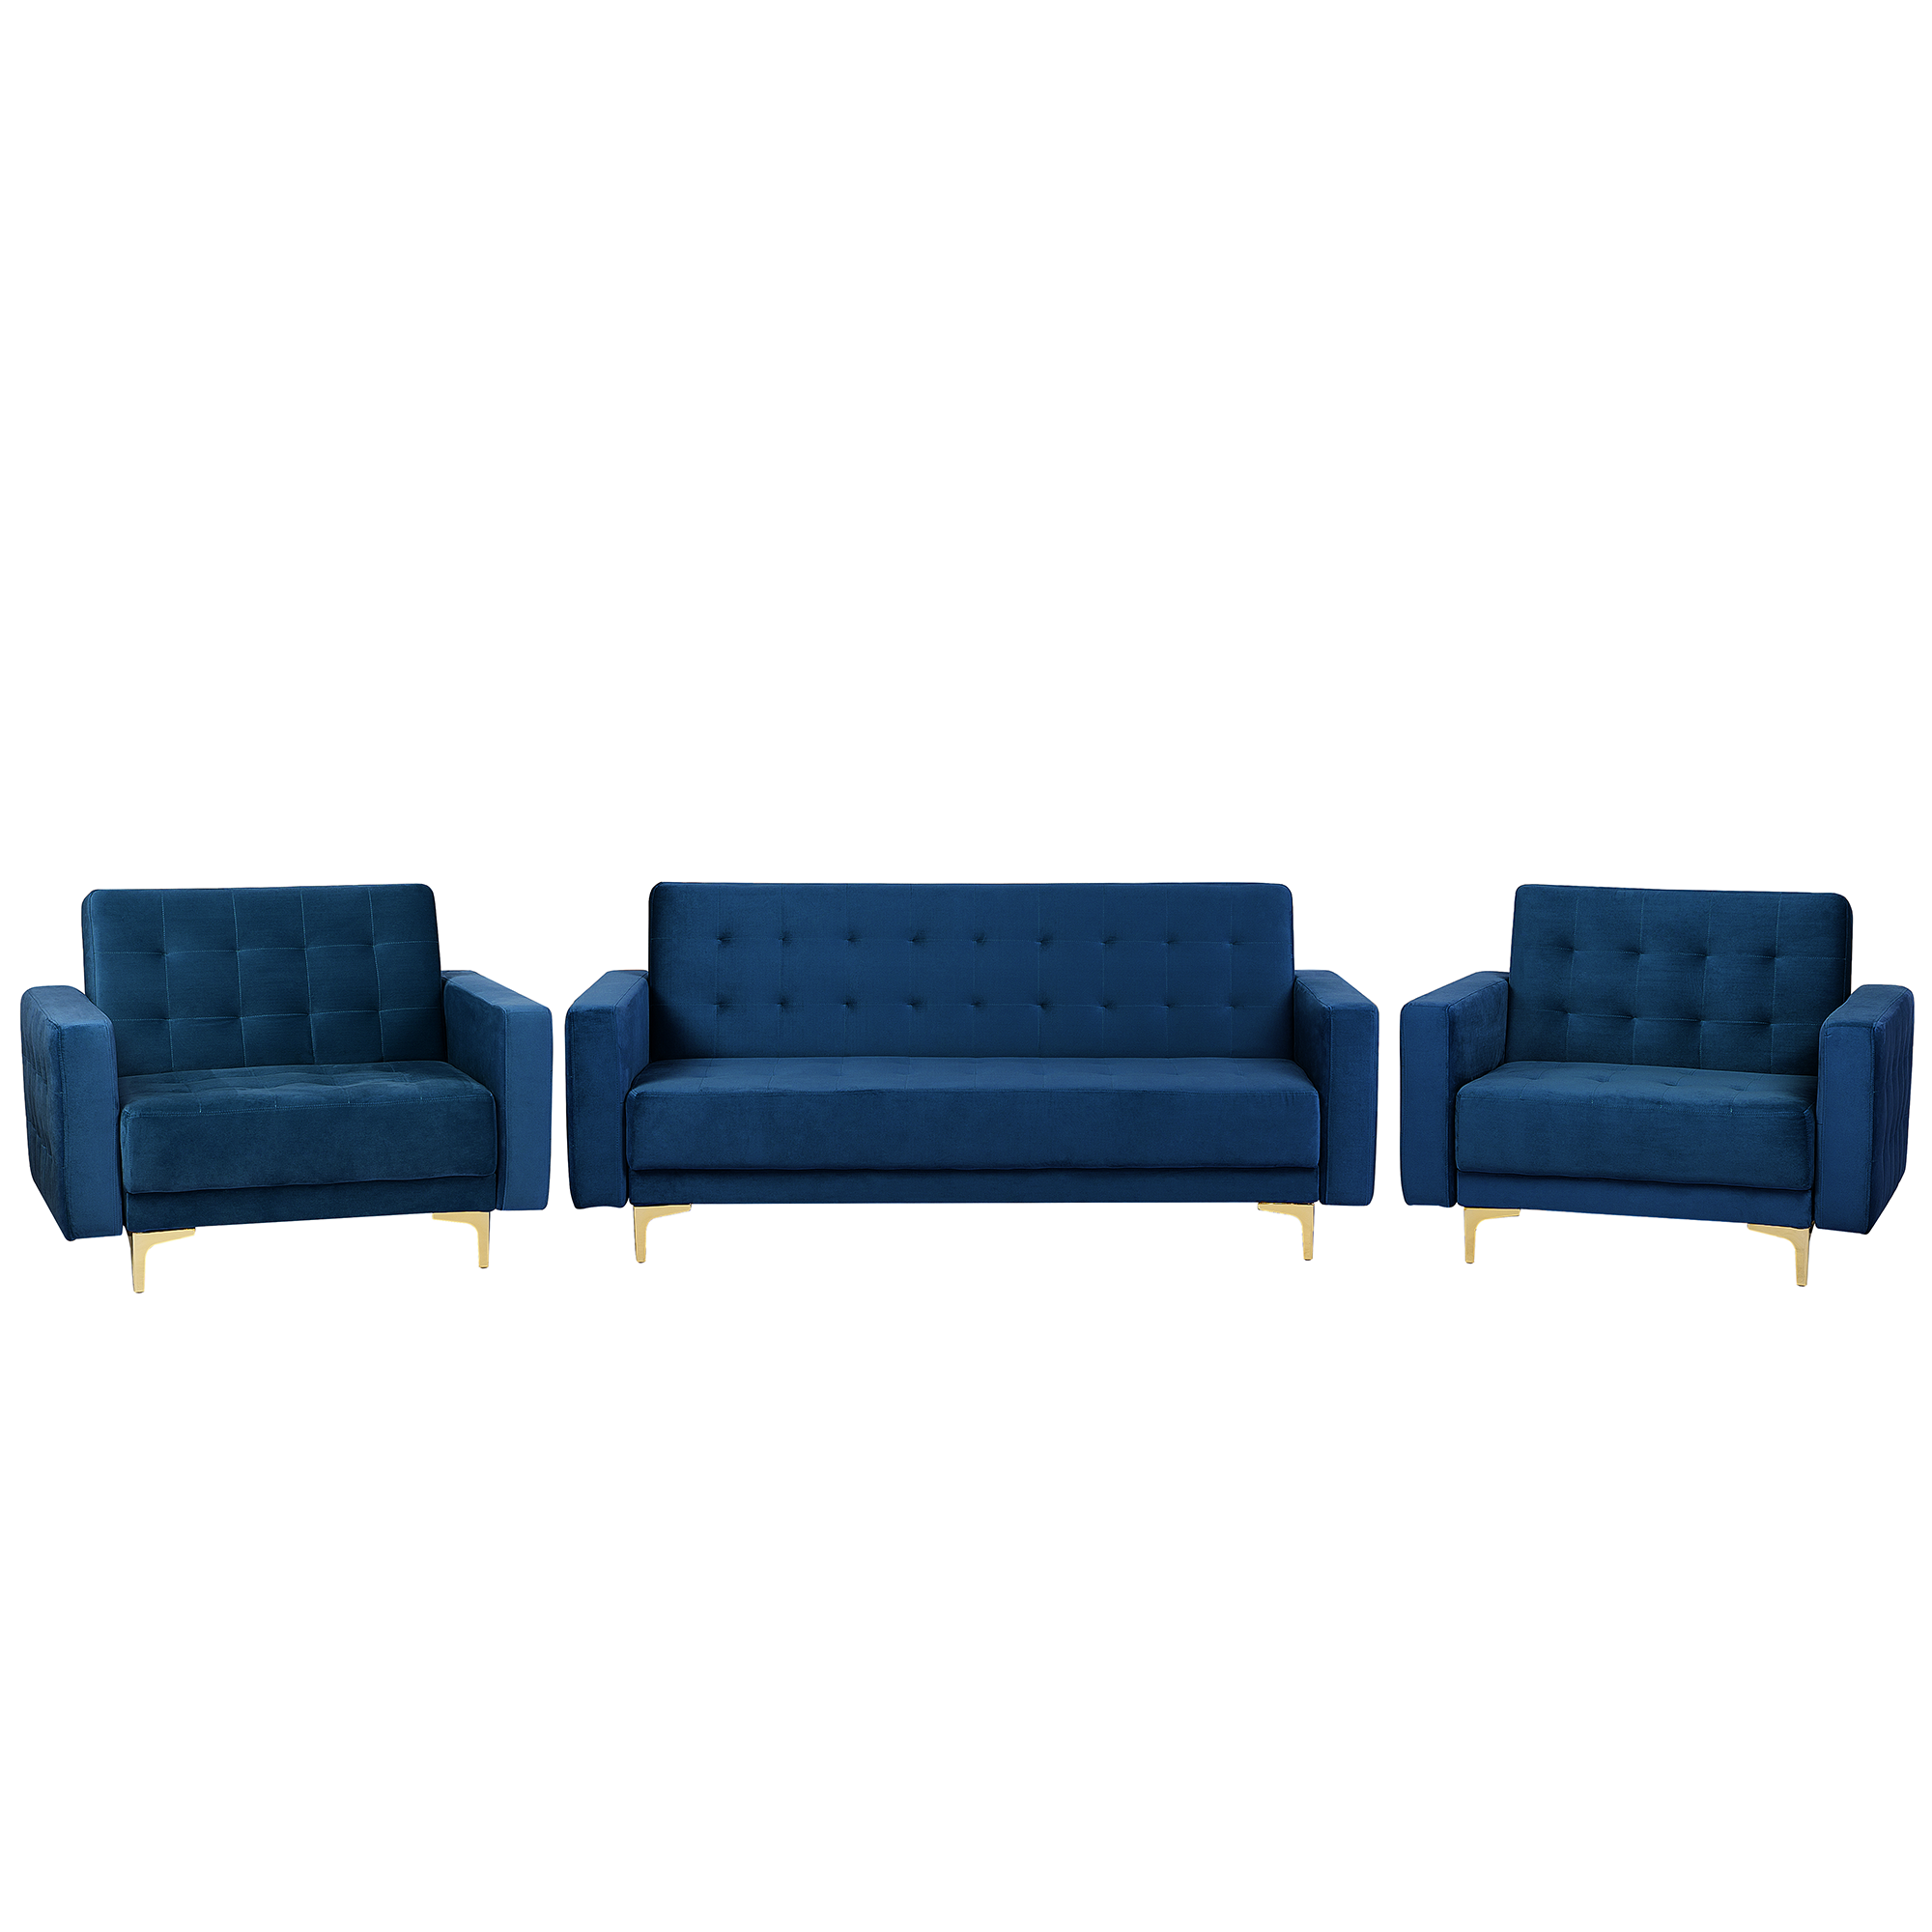 Beliani Living Room Set Navy Blue Velvet Tufted Fabric 3 Seater Sofa Bed 2 Reclining Armchairs Modern 3-Piece Suite